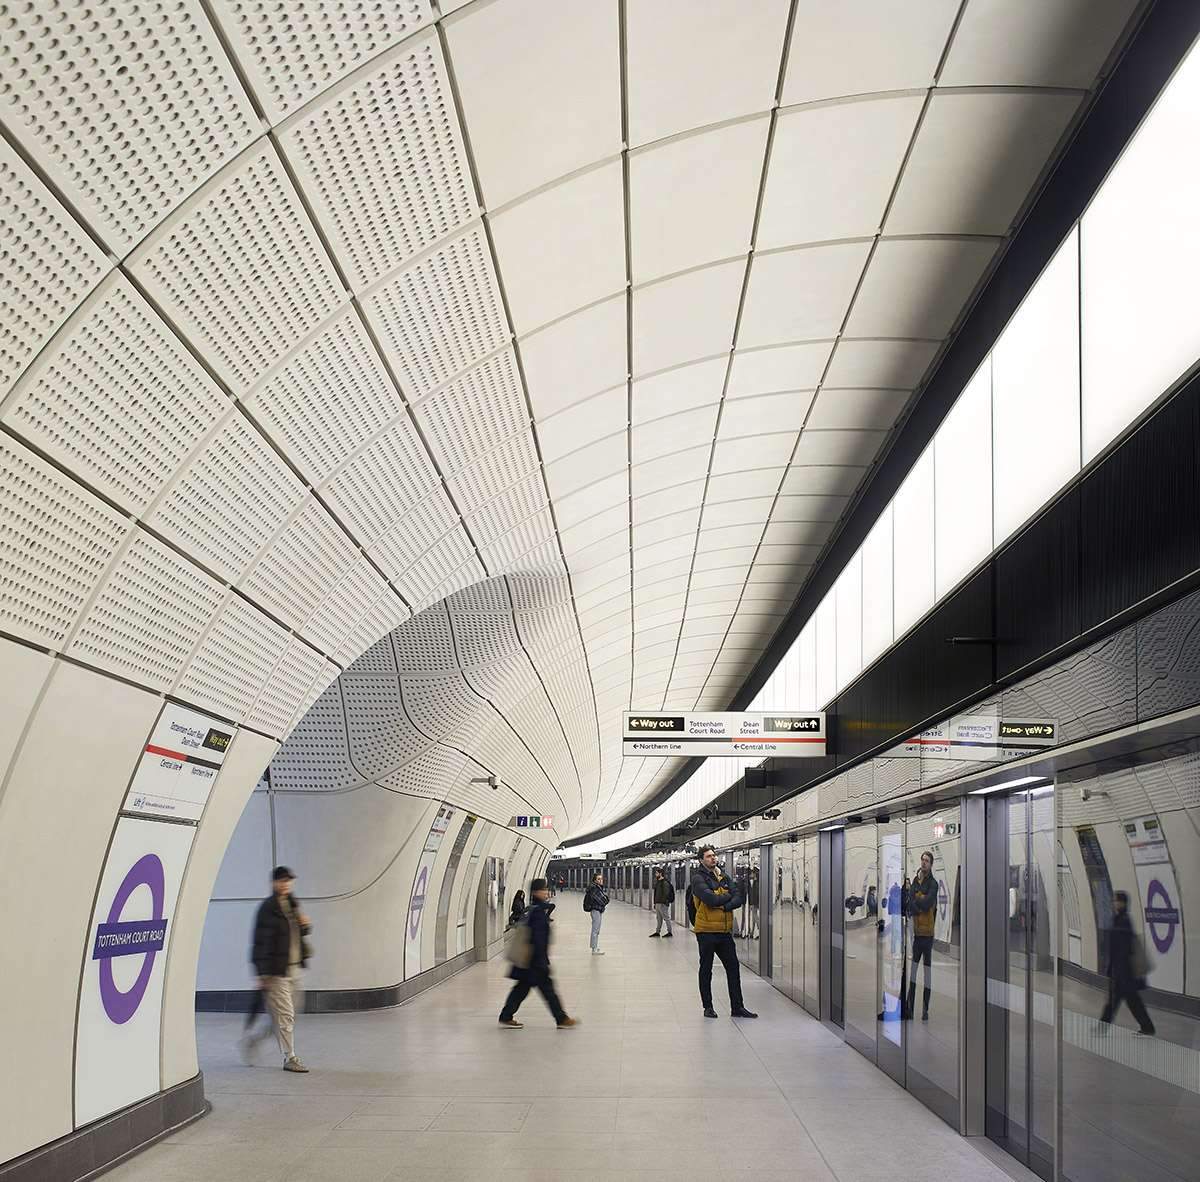 Opening of the newest railway line in London entitled Elizabeth Line